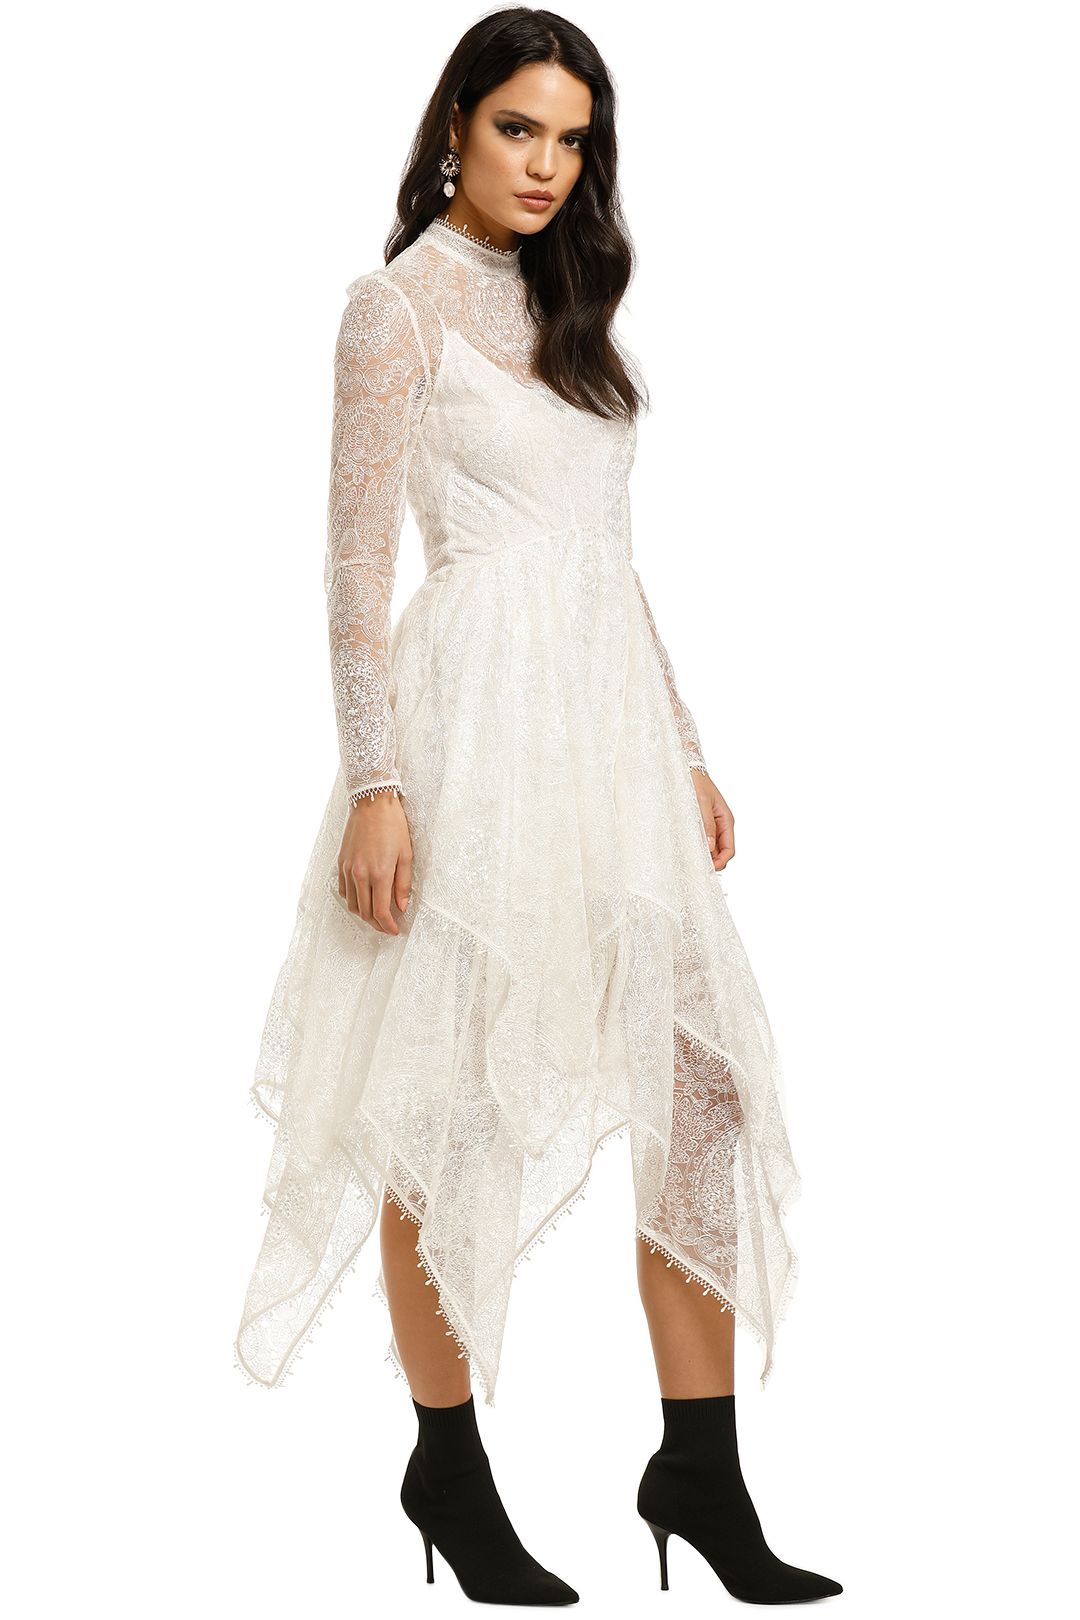 Leo-and-Lin-Serenity-Lace-Handkerchief-Dress-White-Side